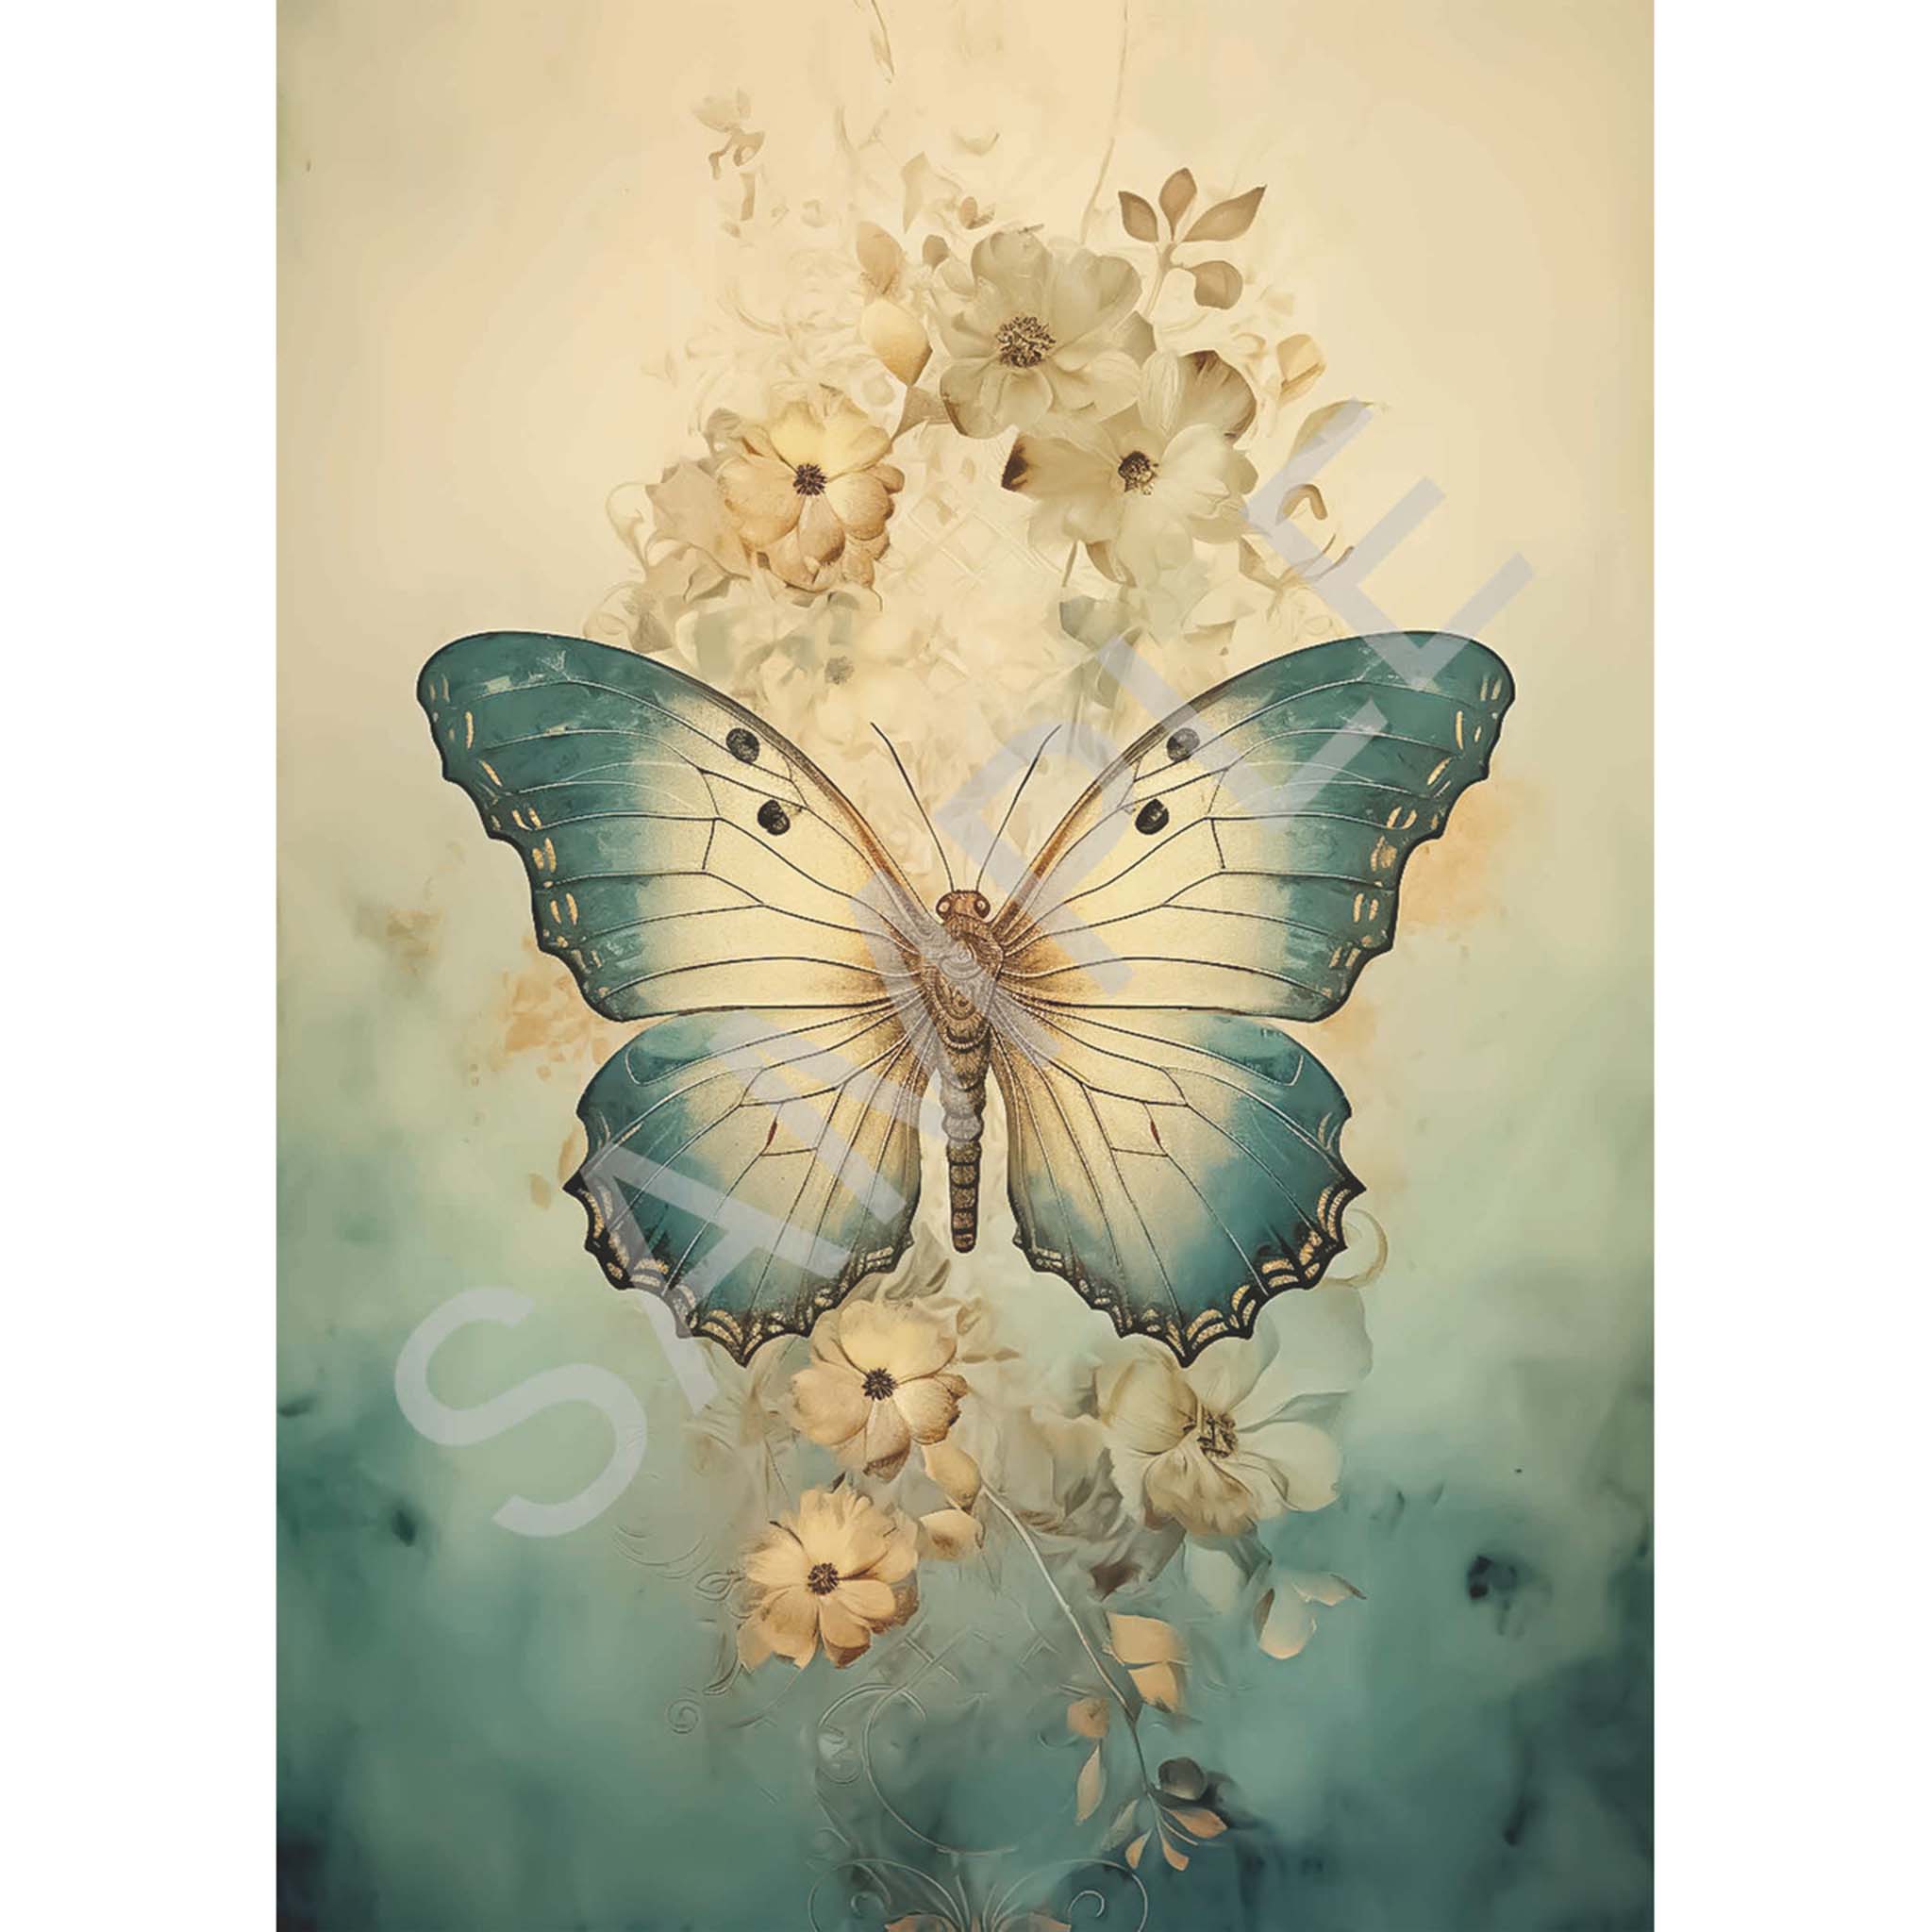 A4 rice paper design that features a large blue and cream butterfly, set against a dreamy background adorned with a garland of soft yellow flowers. White borders are on the sides.